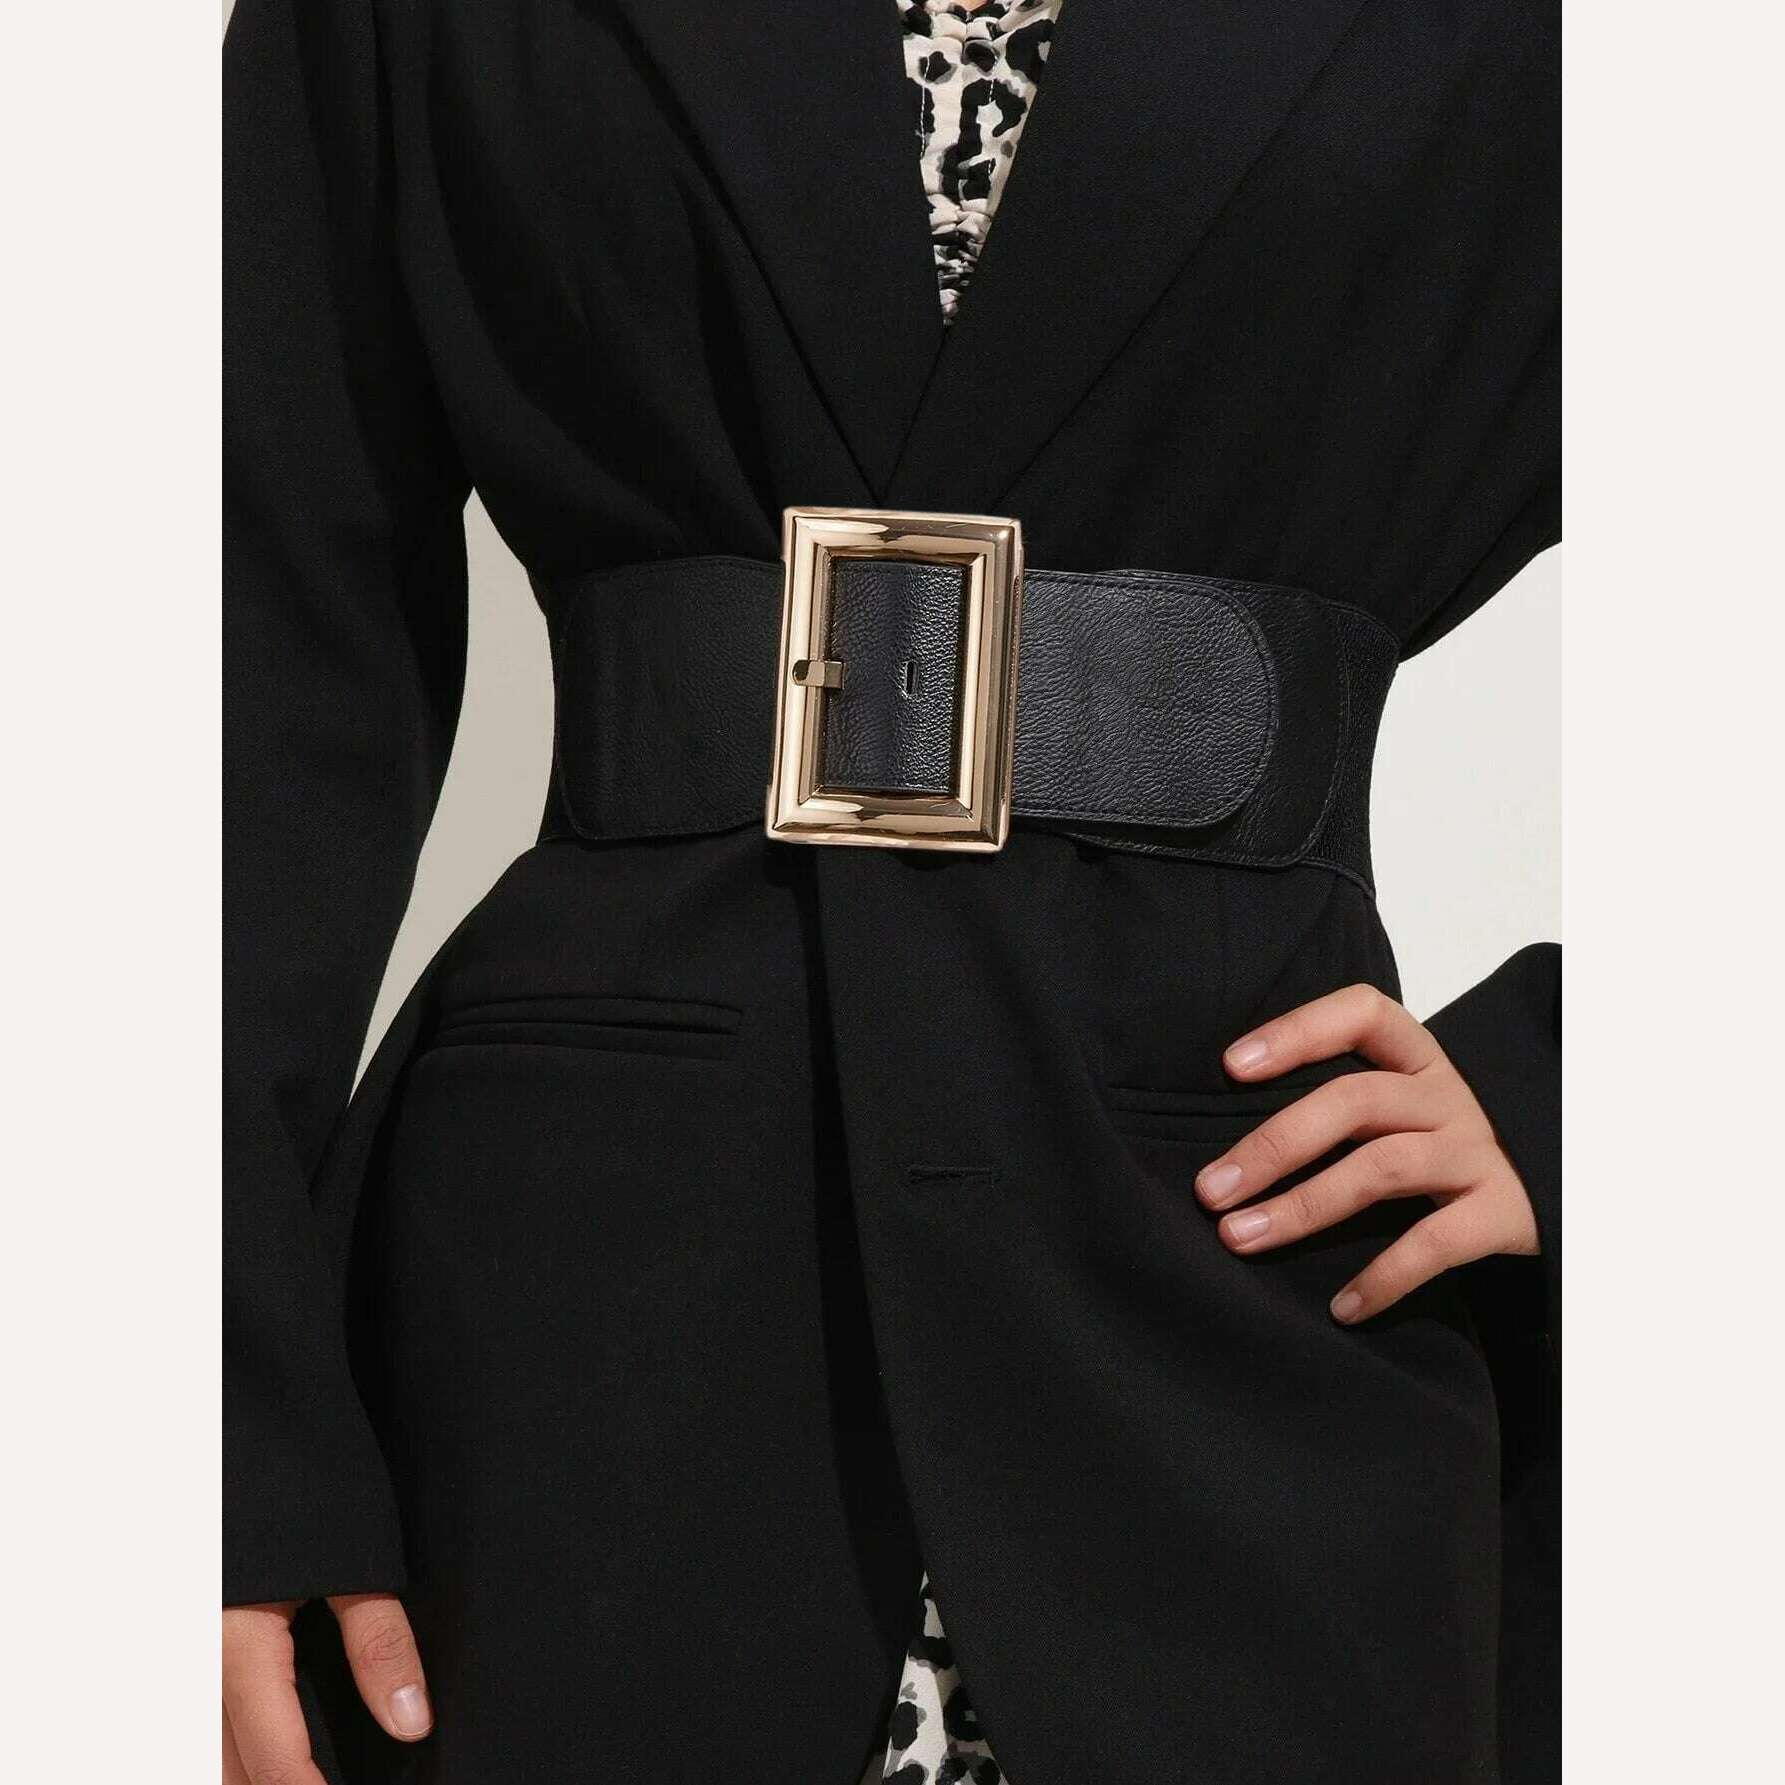 KIMLUD, Wide Square Buckle Women's Elastic Waist Belt To Match Loose Fit Dresses, Coats, Sweaters, Trousers, Skirts, Black / 70cm to 85cm, KIMLUD Women's Clothes